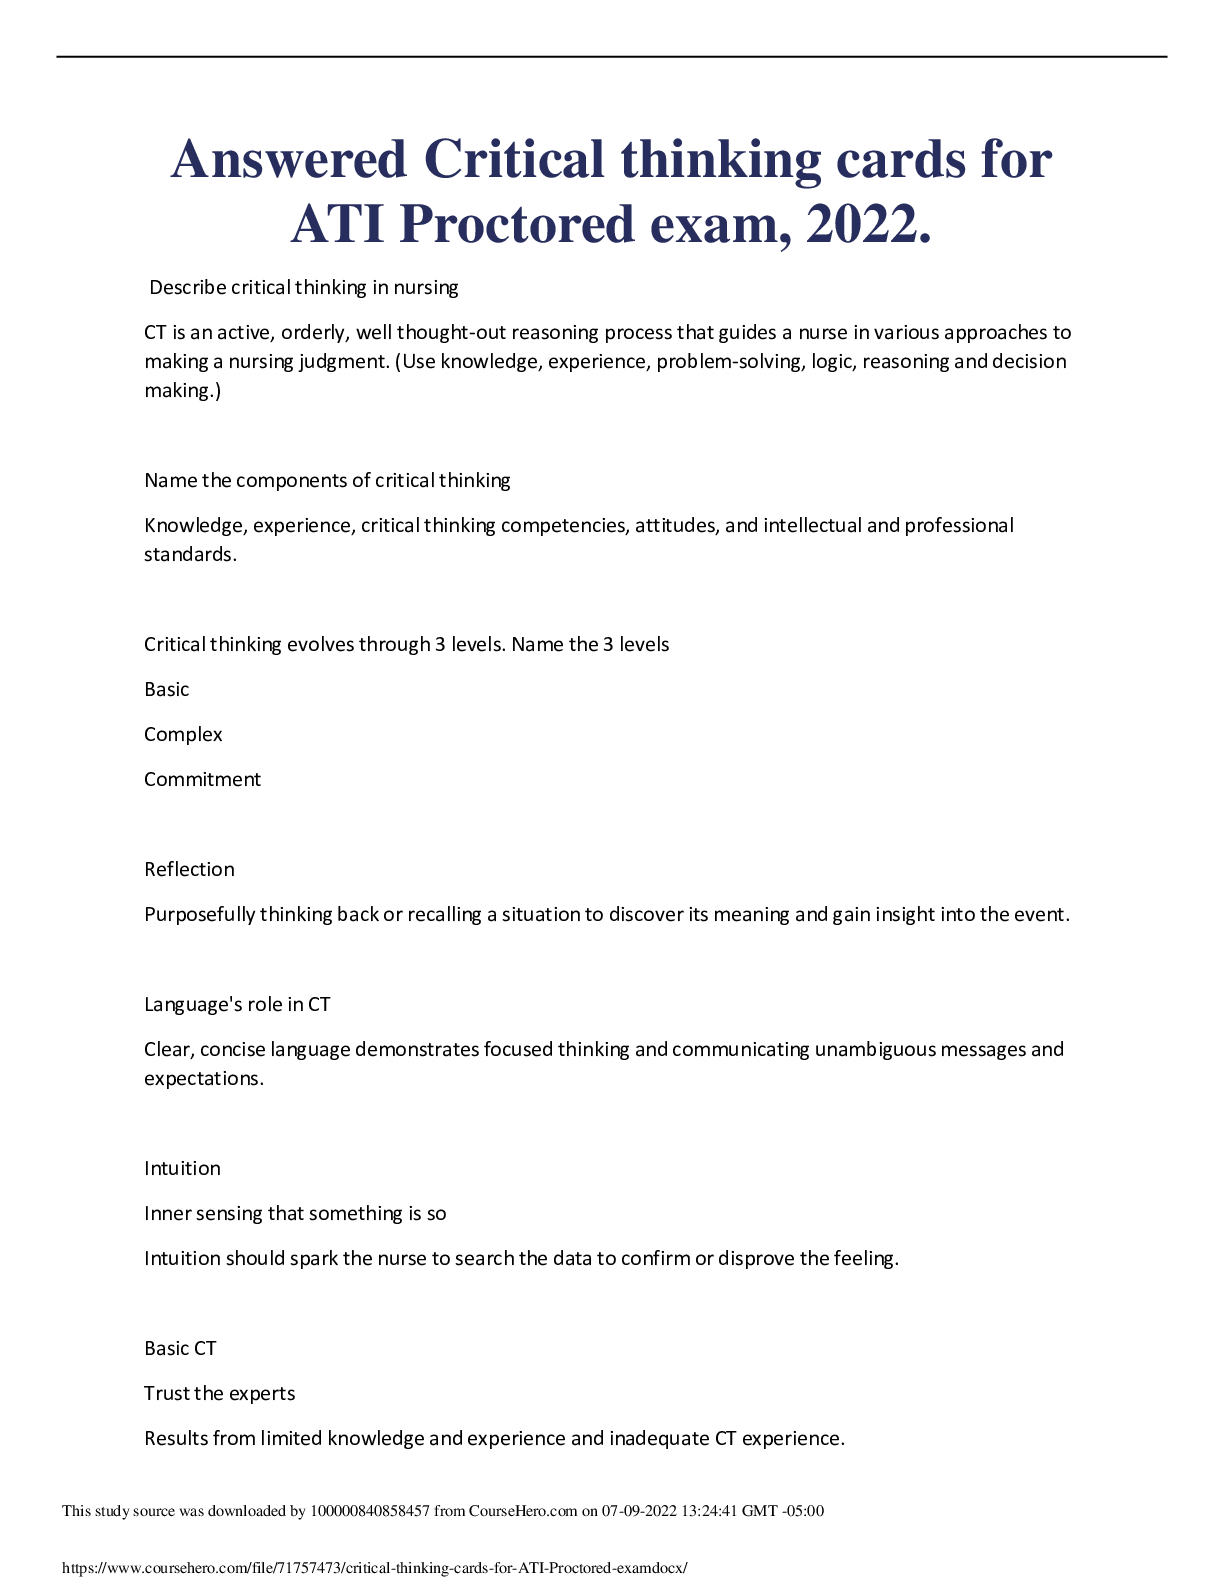 ati critical thinking exit proctored assessment